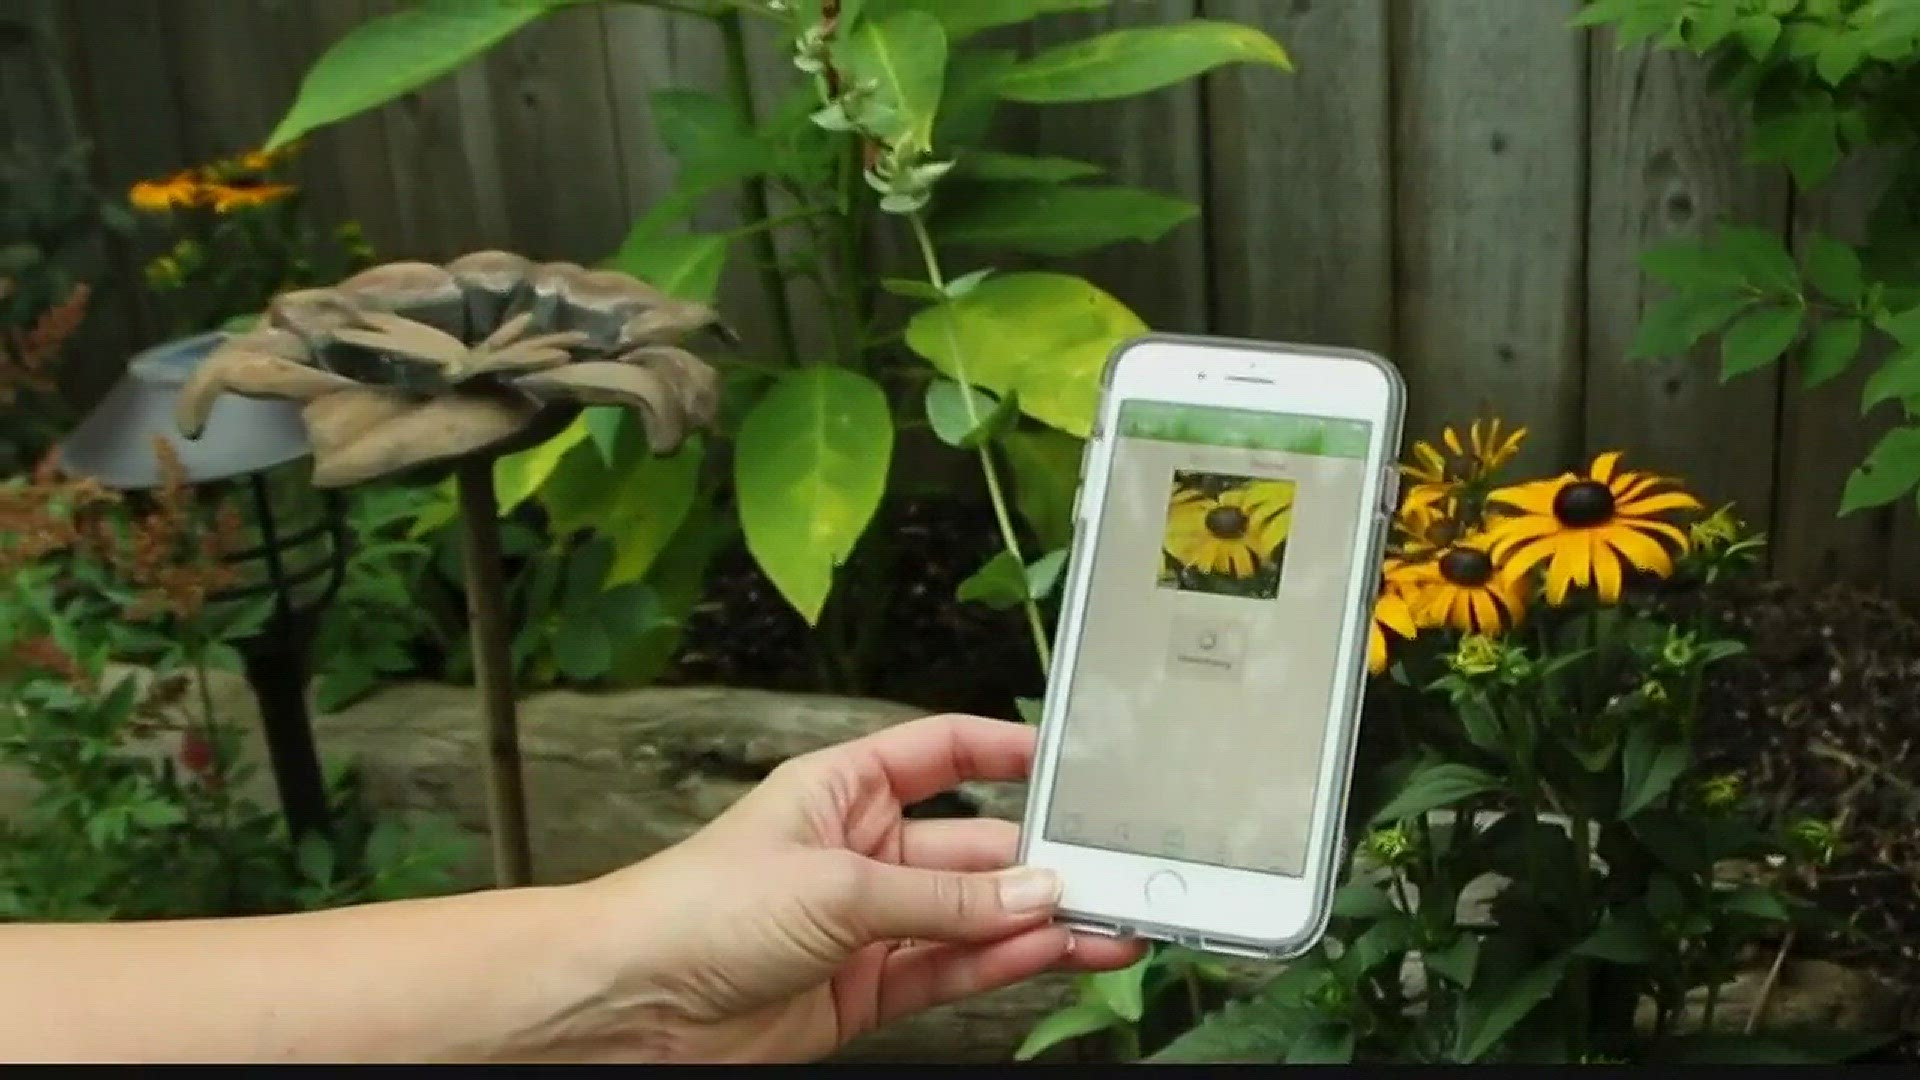 KREM 2's Jane McCarthy checks out a new app on her phone that lets people take a picture of a plant and it identifies it.